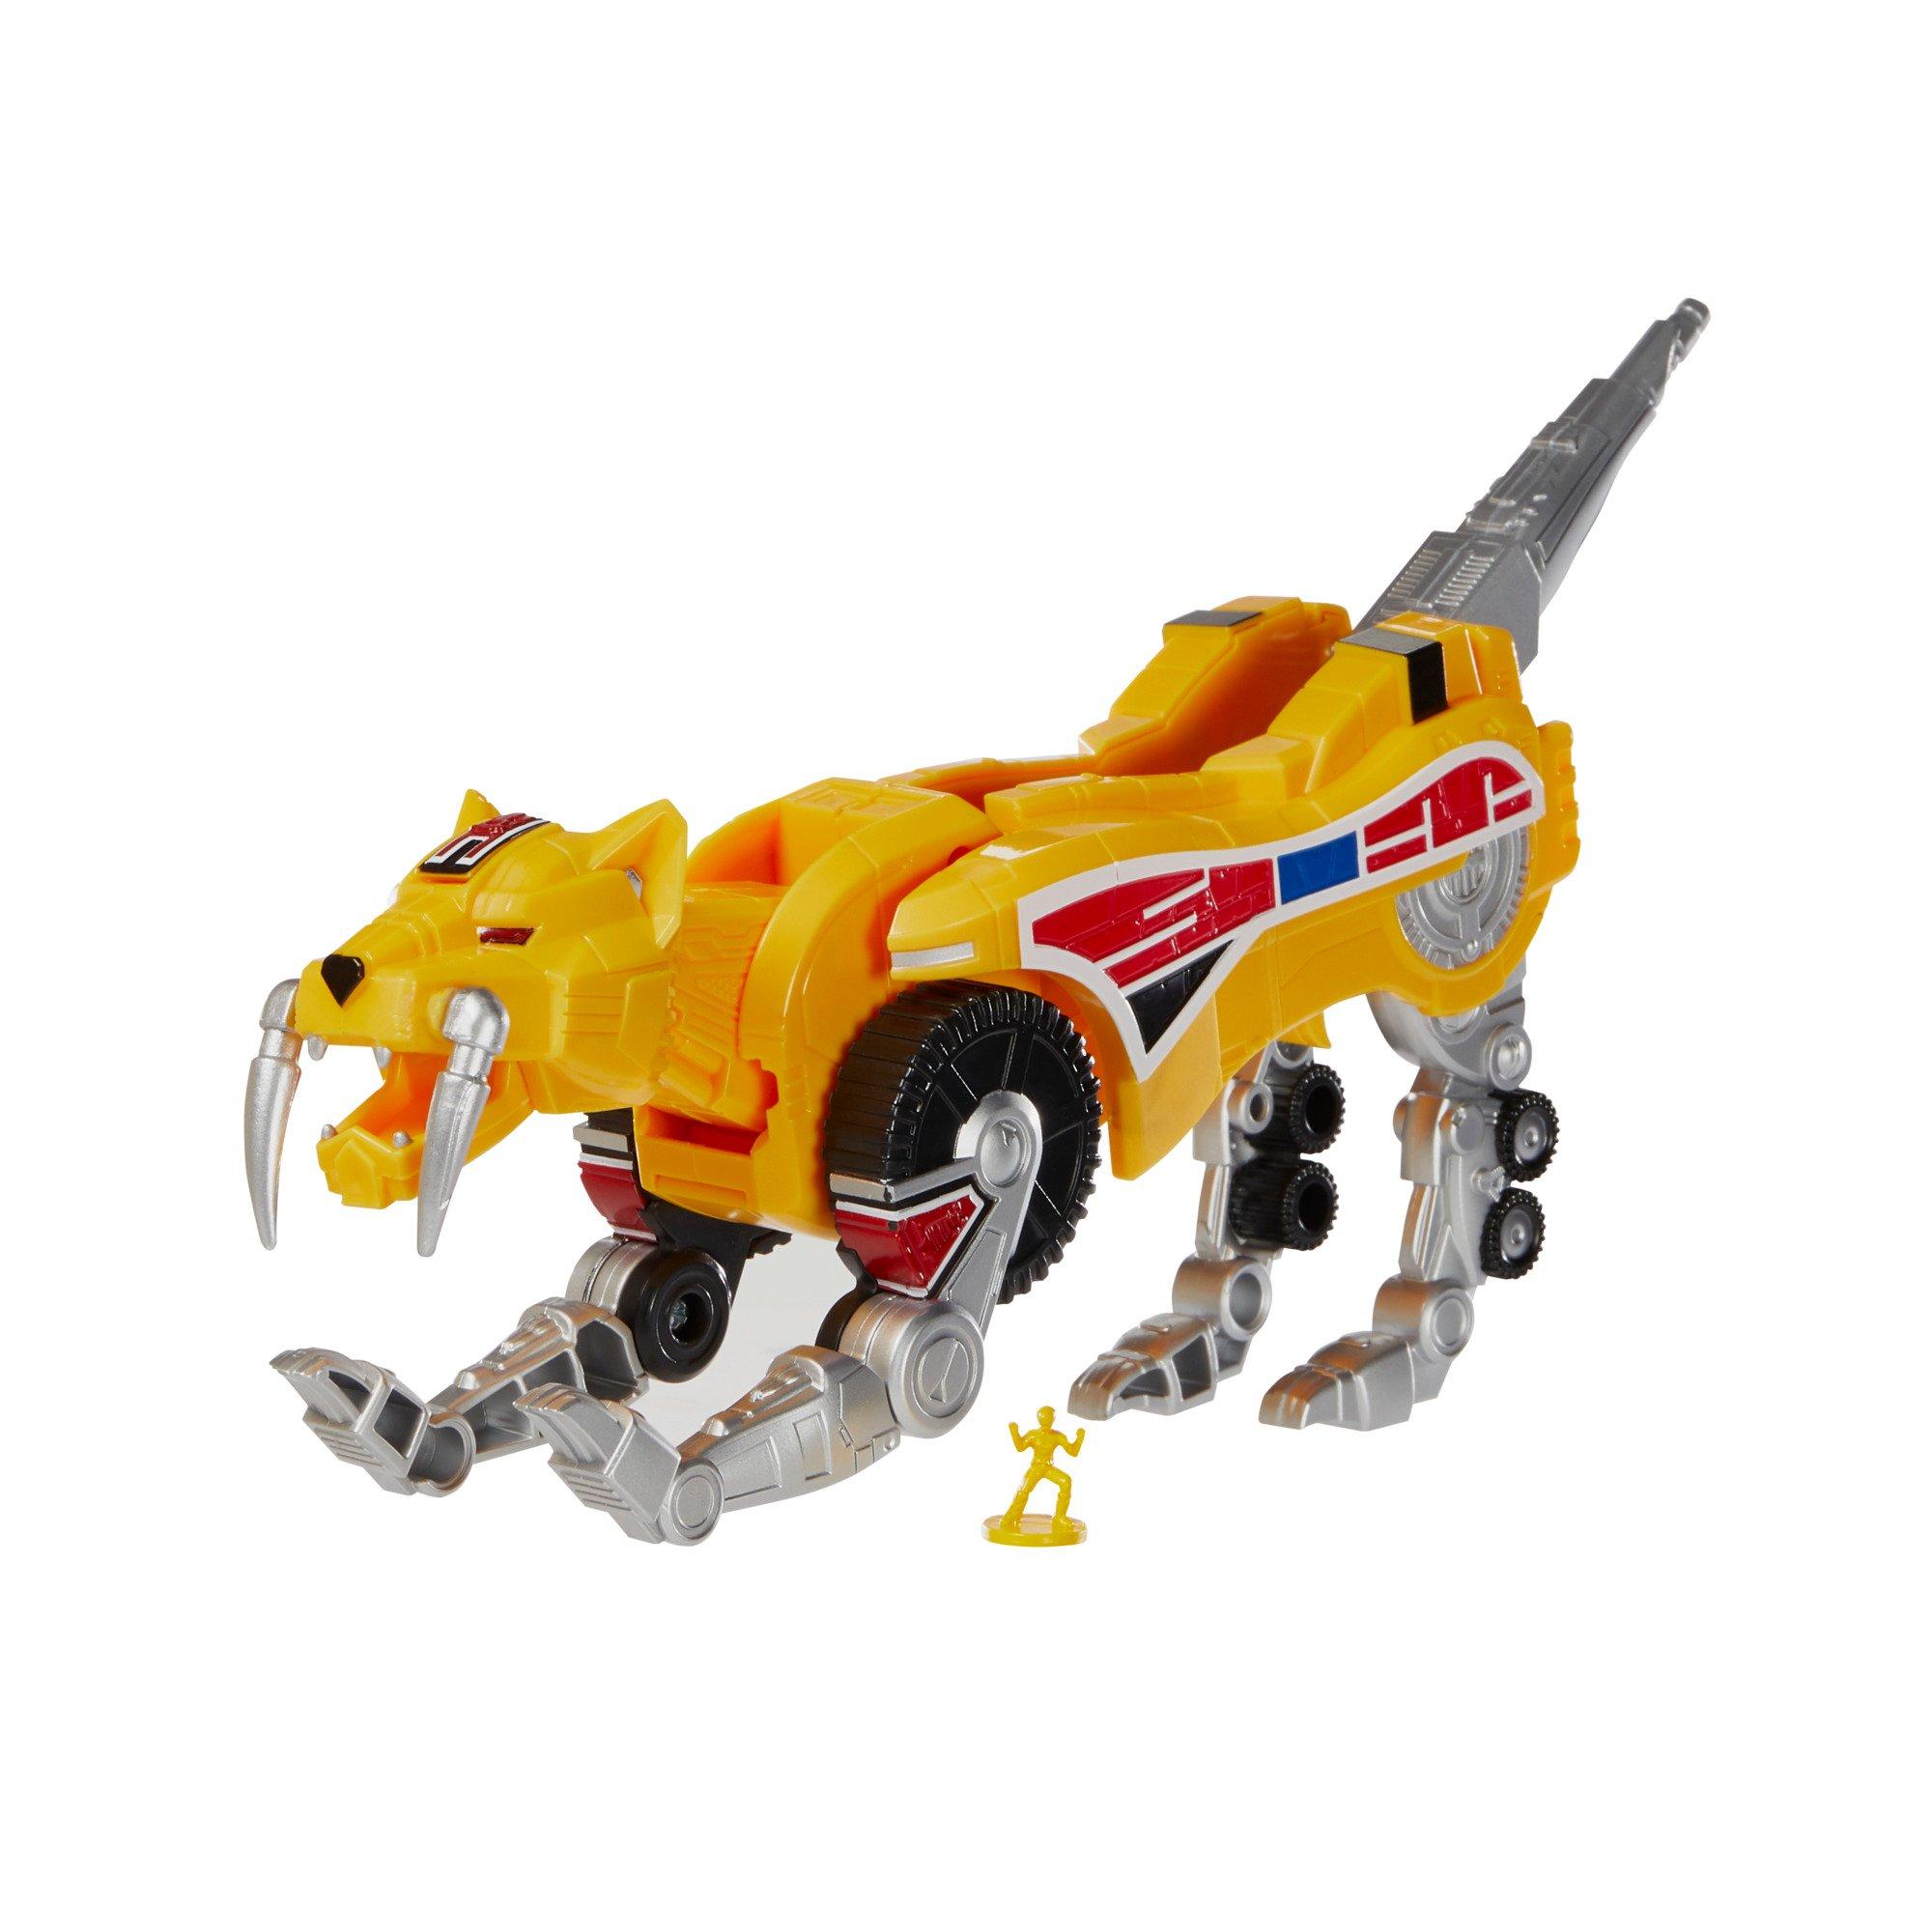 list item 8 of 16 Hasbro Mighty Morphin Power Rangers Zord Ascension Project Dino Megazord Action Figure